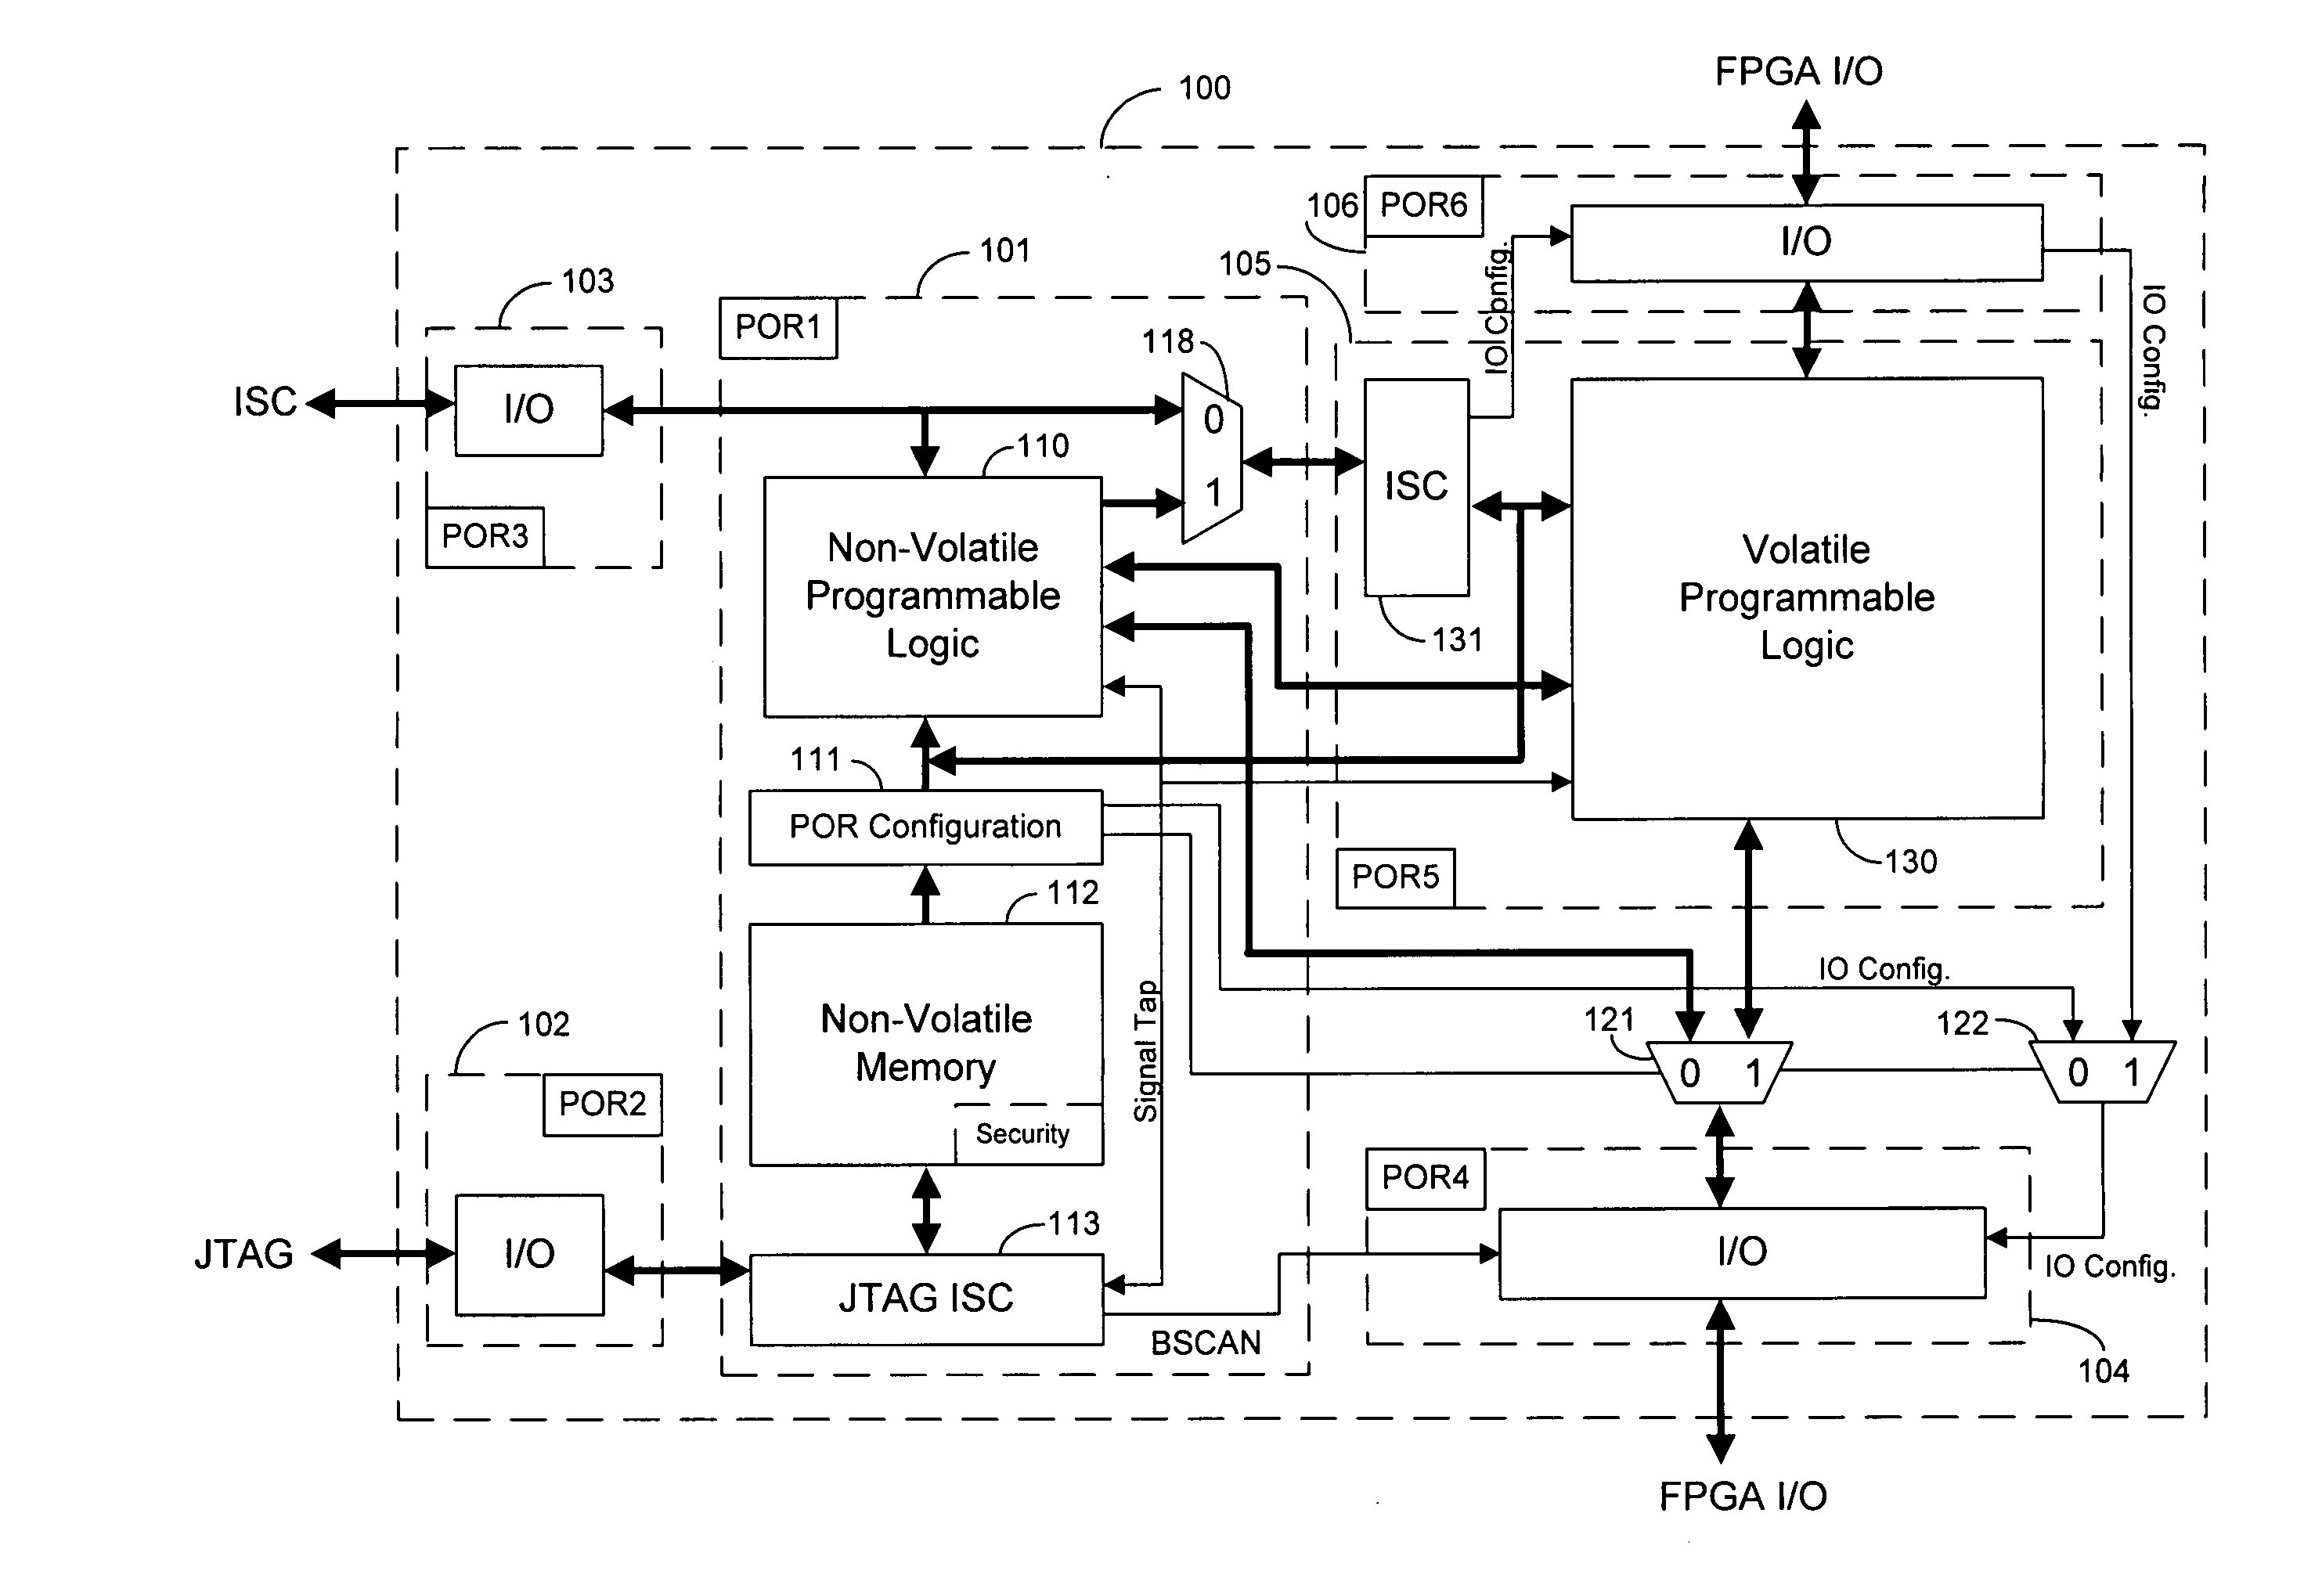 Techniques for combining volatile and non-volatile programmable logic on an integrated circuit